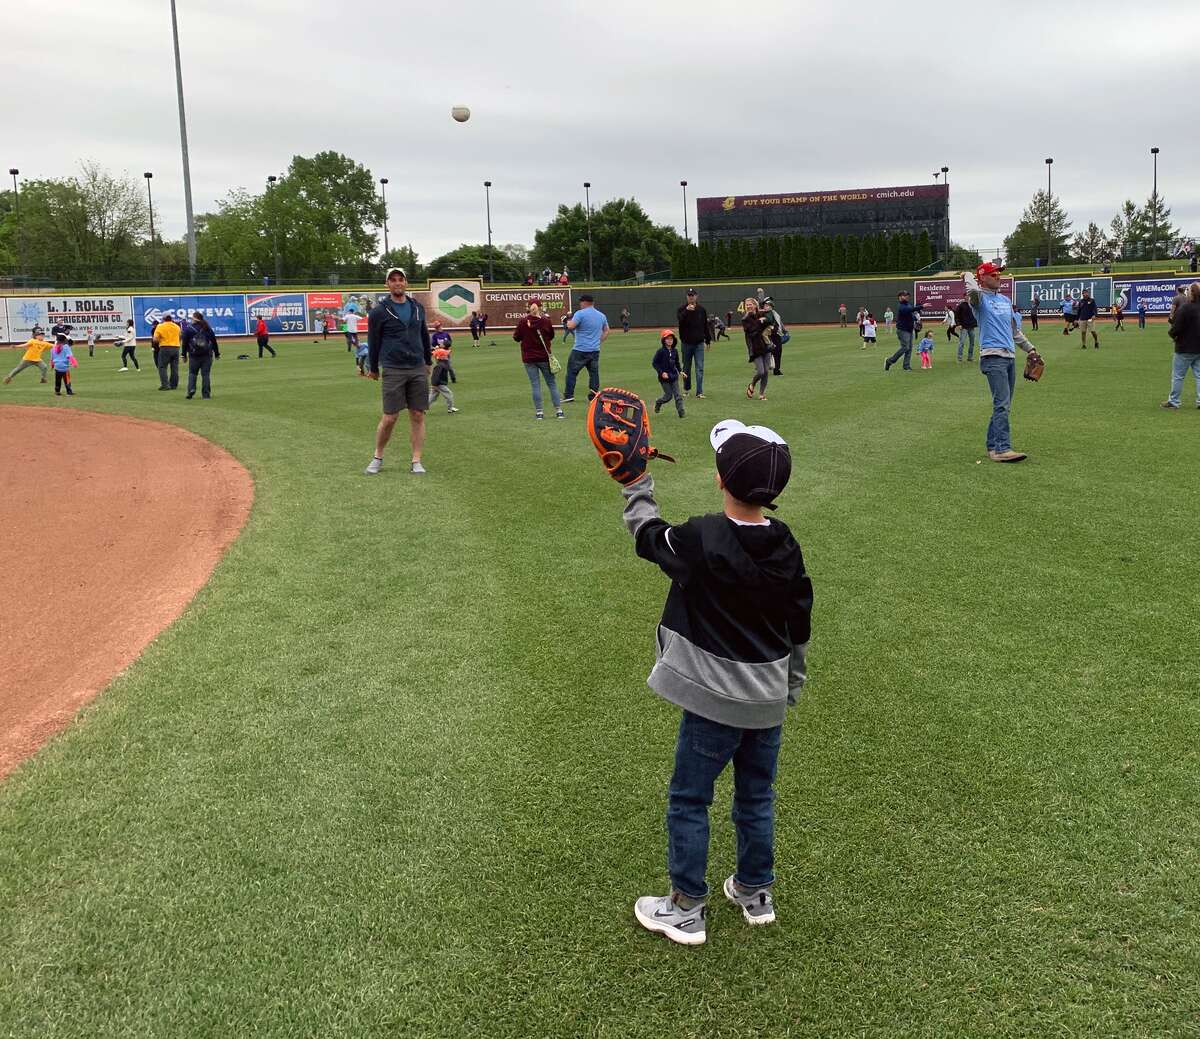 Fathers play catch on the field at Dow Diamond on Father's Day, June 16, 2019. (Photo provided/Ashley VanOchten, Great Lakes Loons)